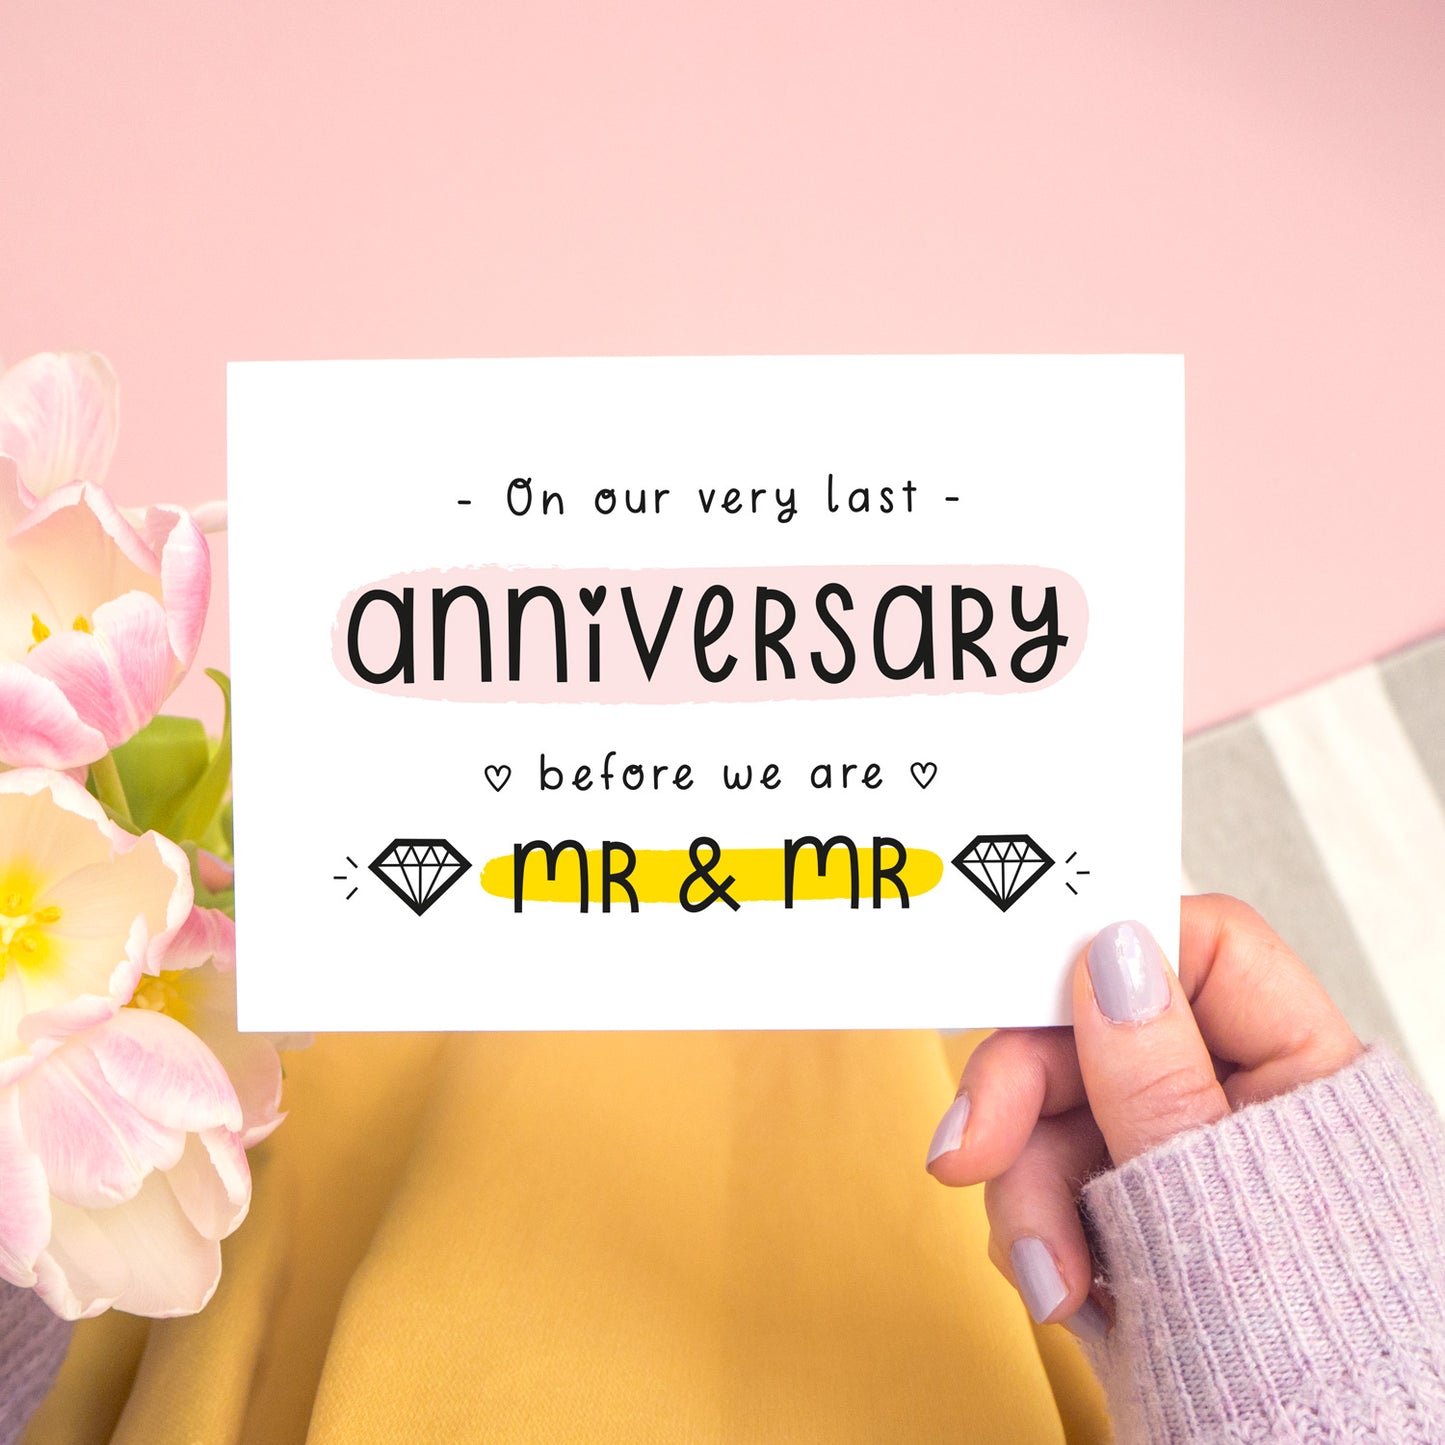 A last anniversary or Valentine’s card photographed on a pink background with pink tulip flowers, a grey and white stripe rug and yellow fabric. This image shows the last anniversary option with the Mr & Mr wording. The text is black and there are pops of yellow and pink behind key words.